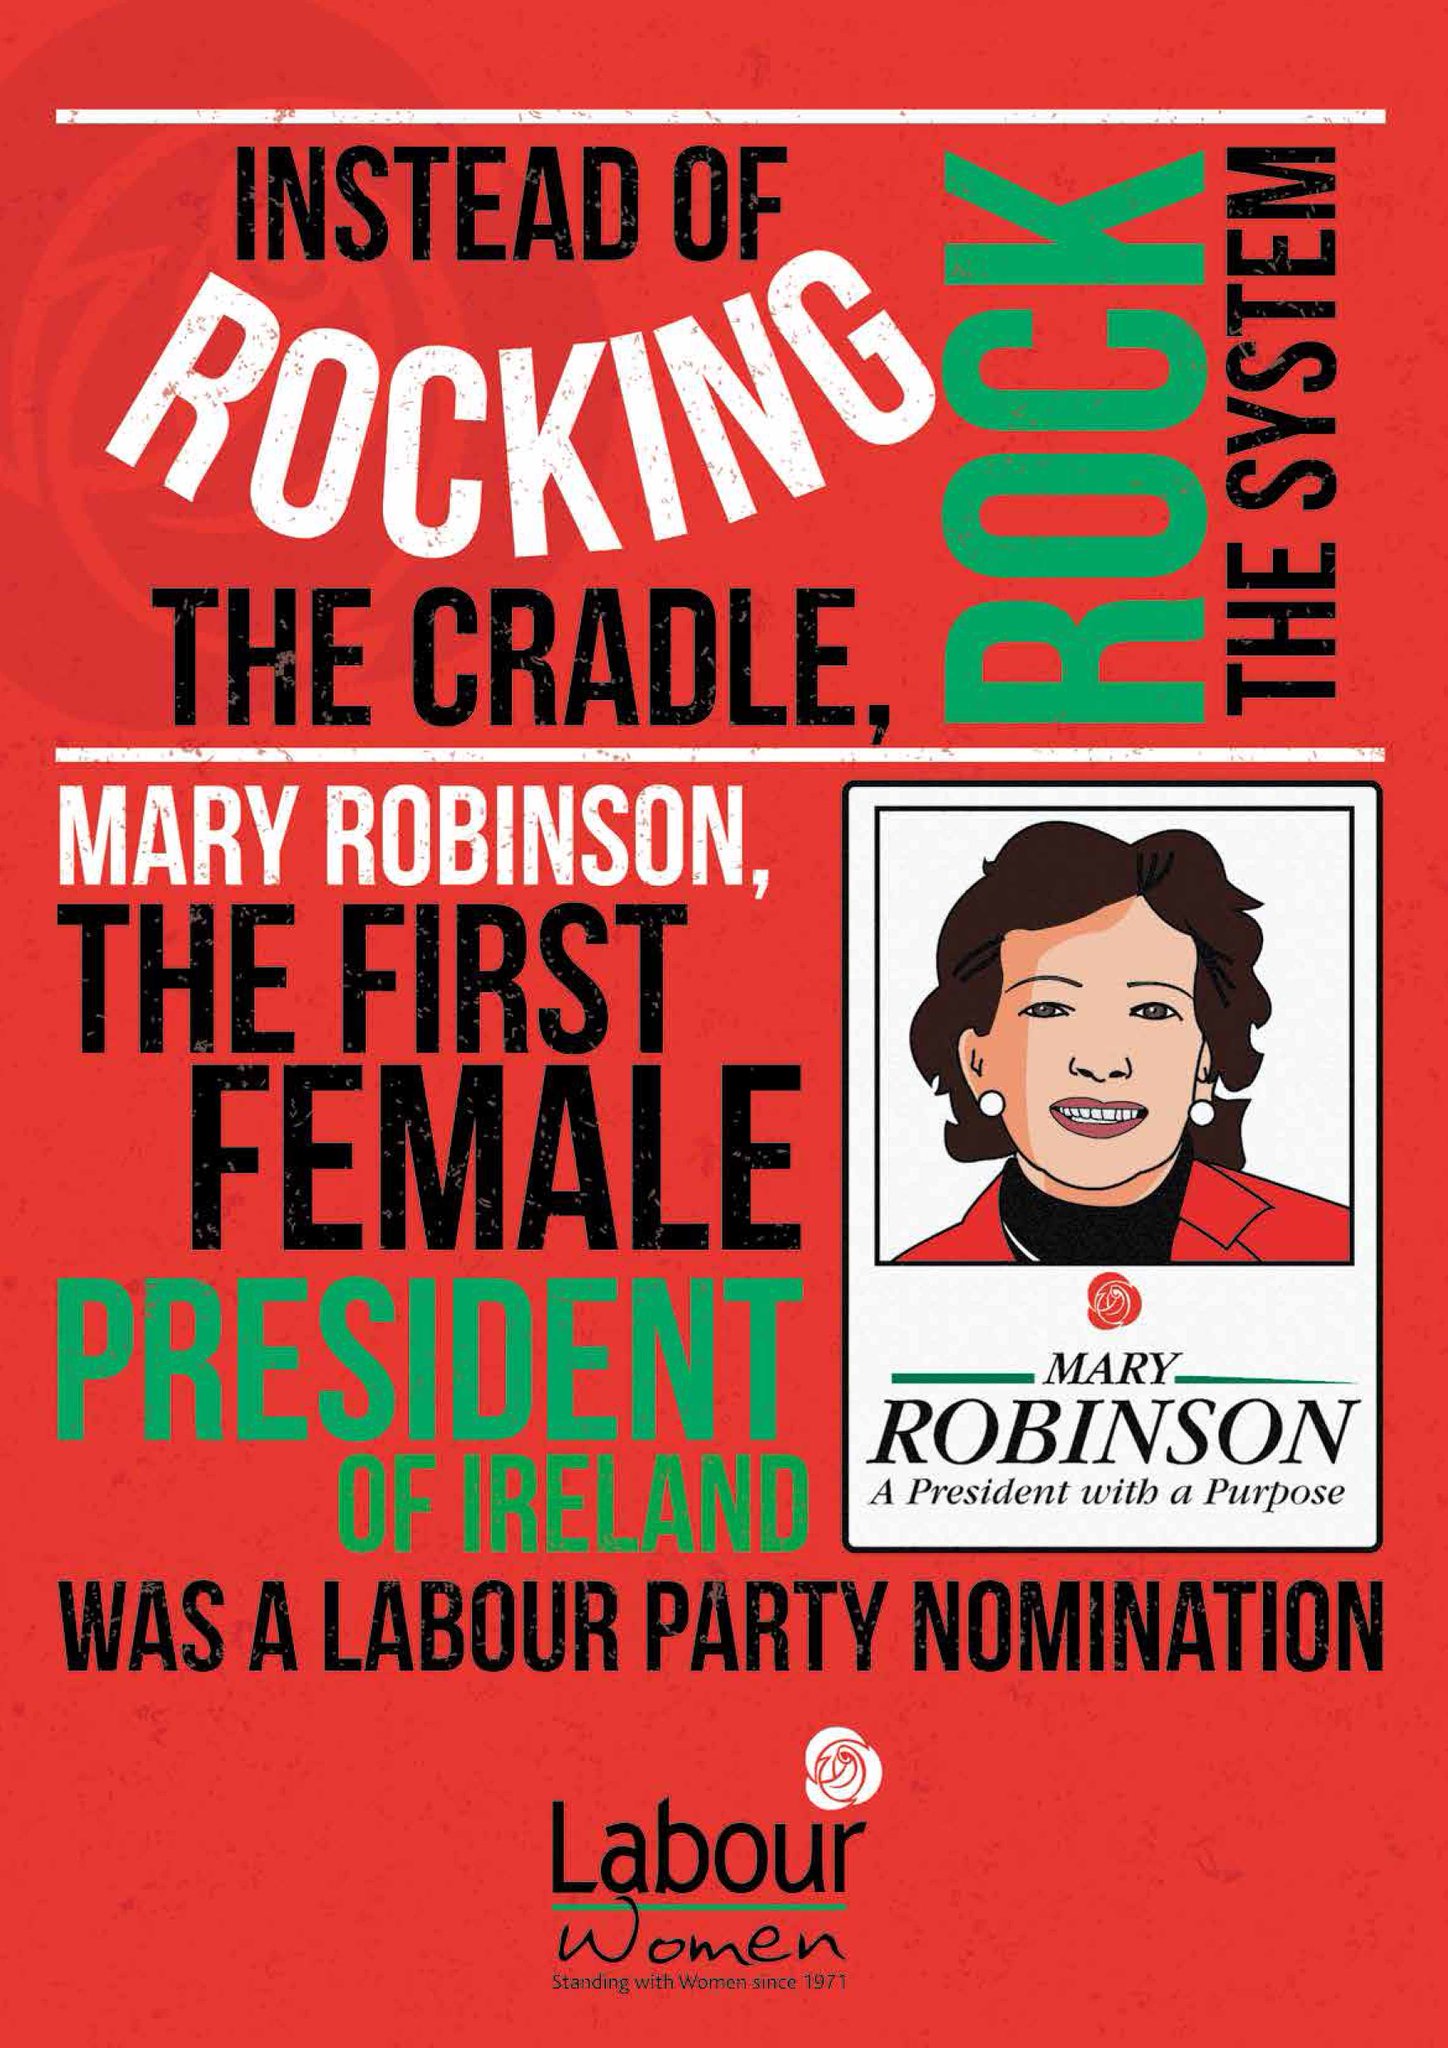 The Labour Party on Twitter: "#OnThisDay in 1990, Mary Robinson was elected President of Ireland, the first woman to hold the post. 🌹 https://t.co/Z2hgBsLhx5" / Twitter